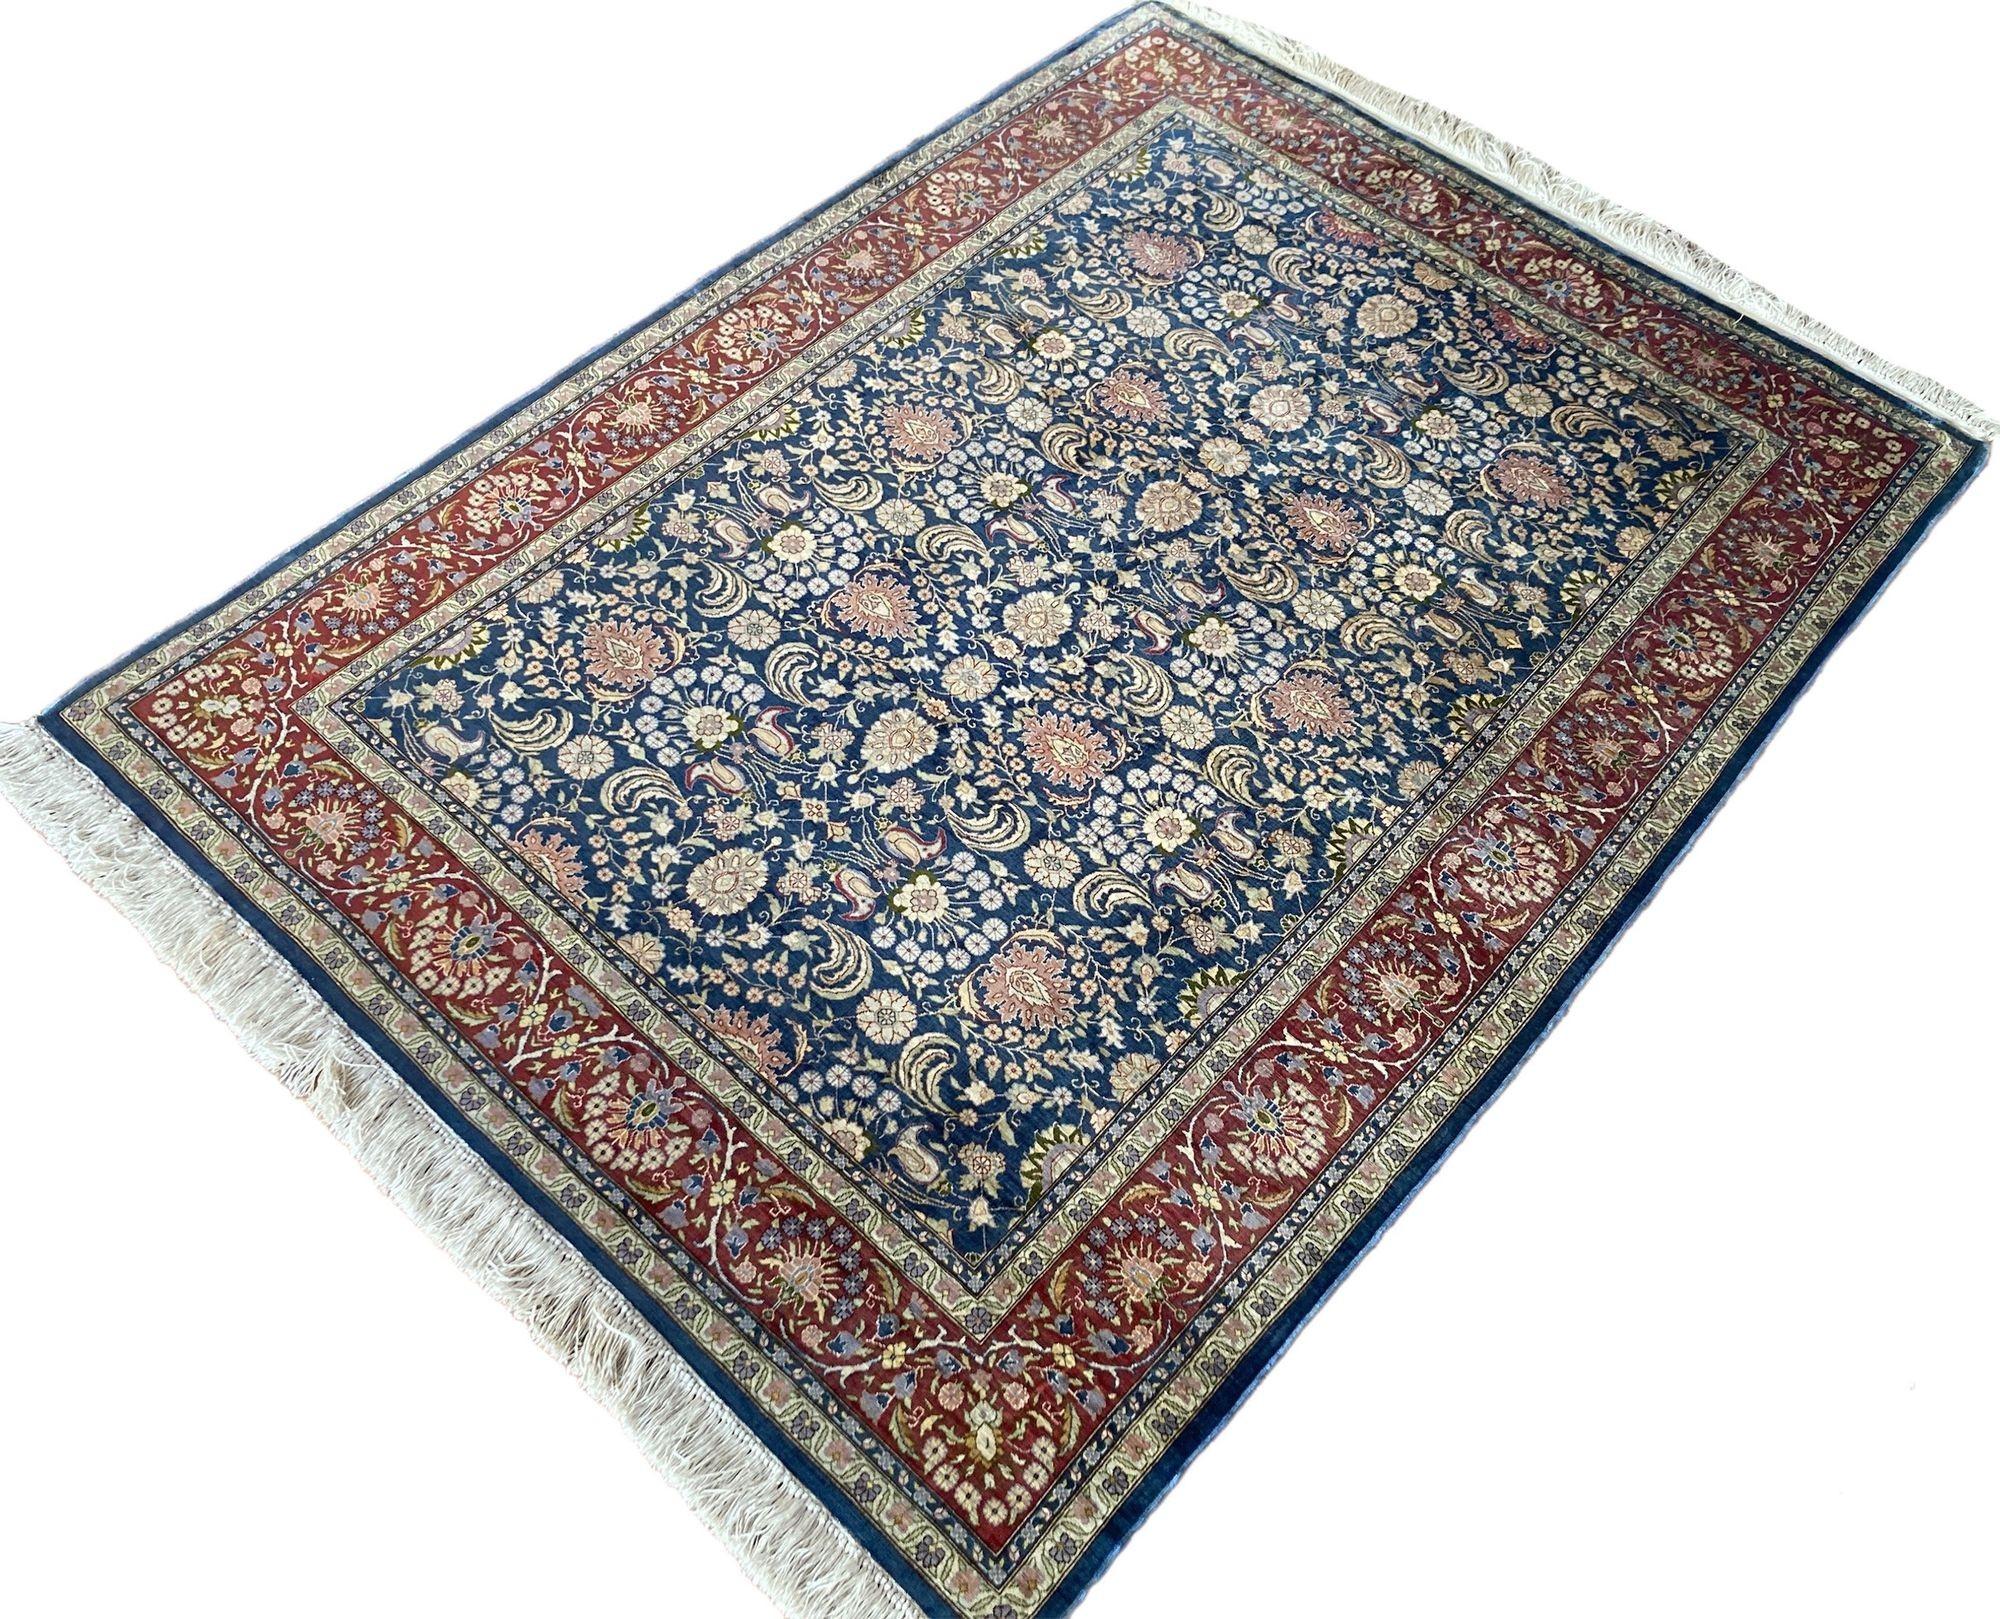 Vintage Turkish Silk Hereke Rug 1.55m x 1.12m In Good Condition For Sale In St. Albans, GB